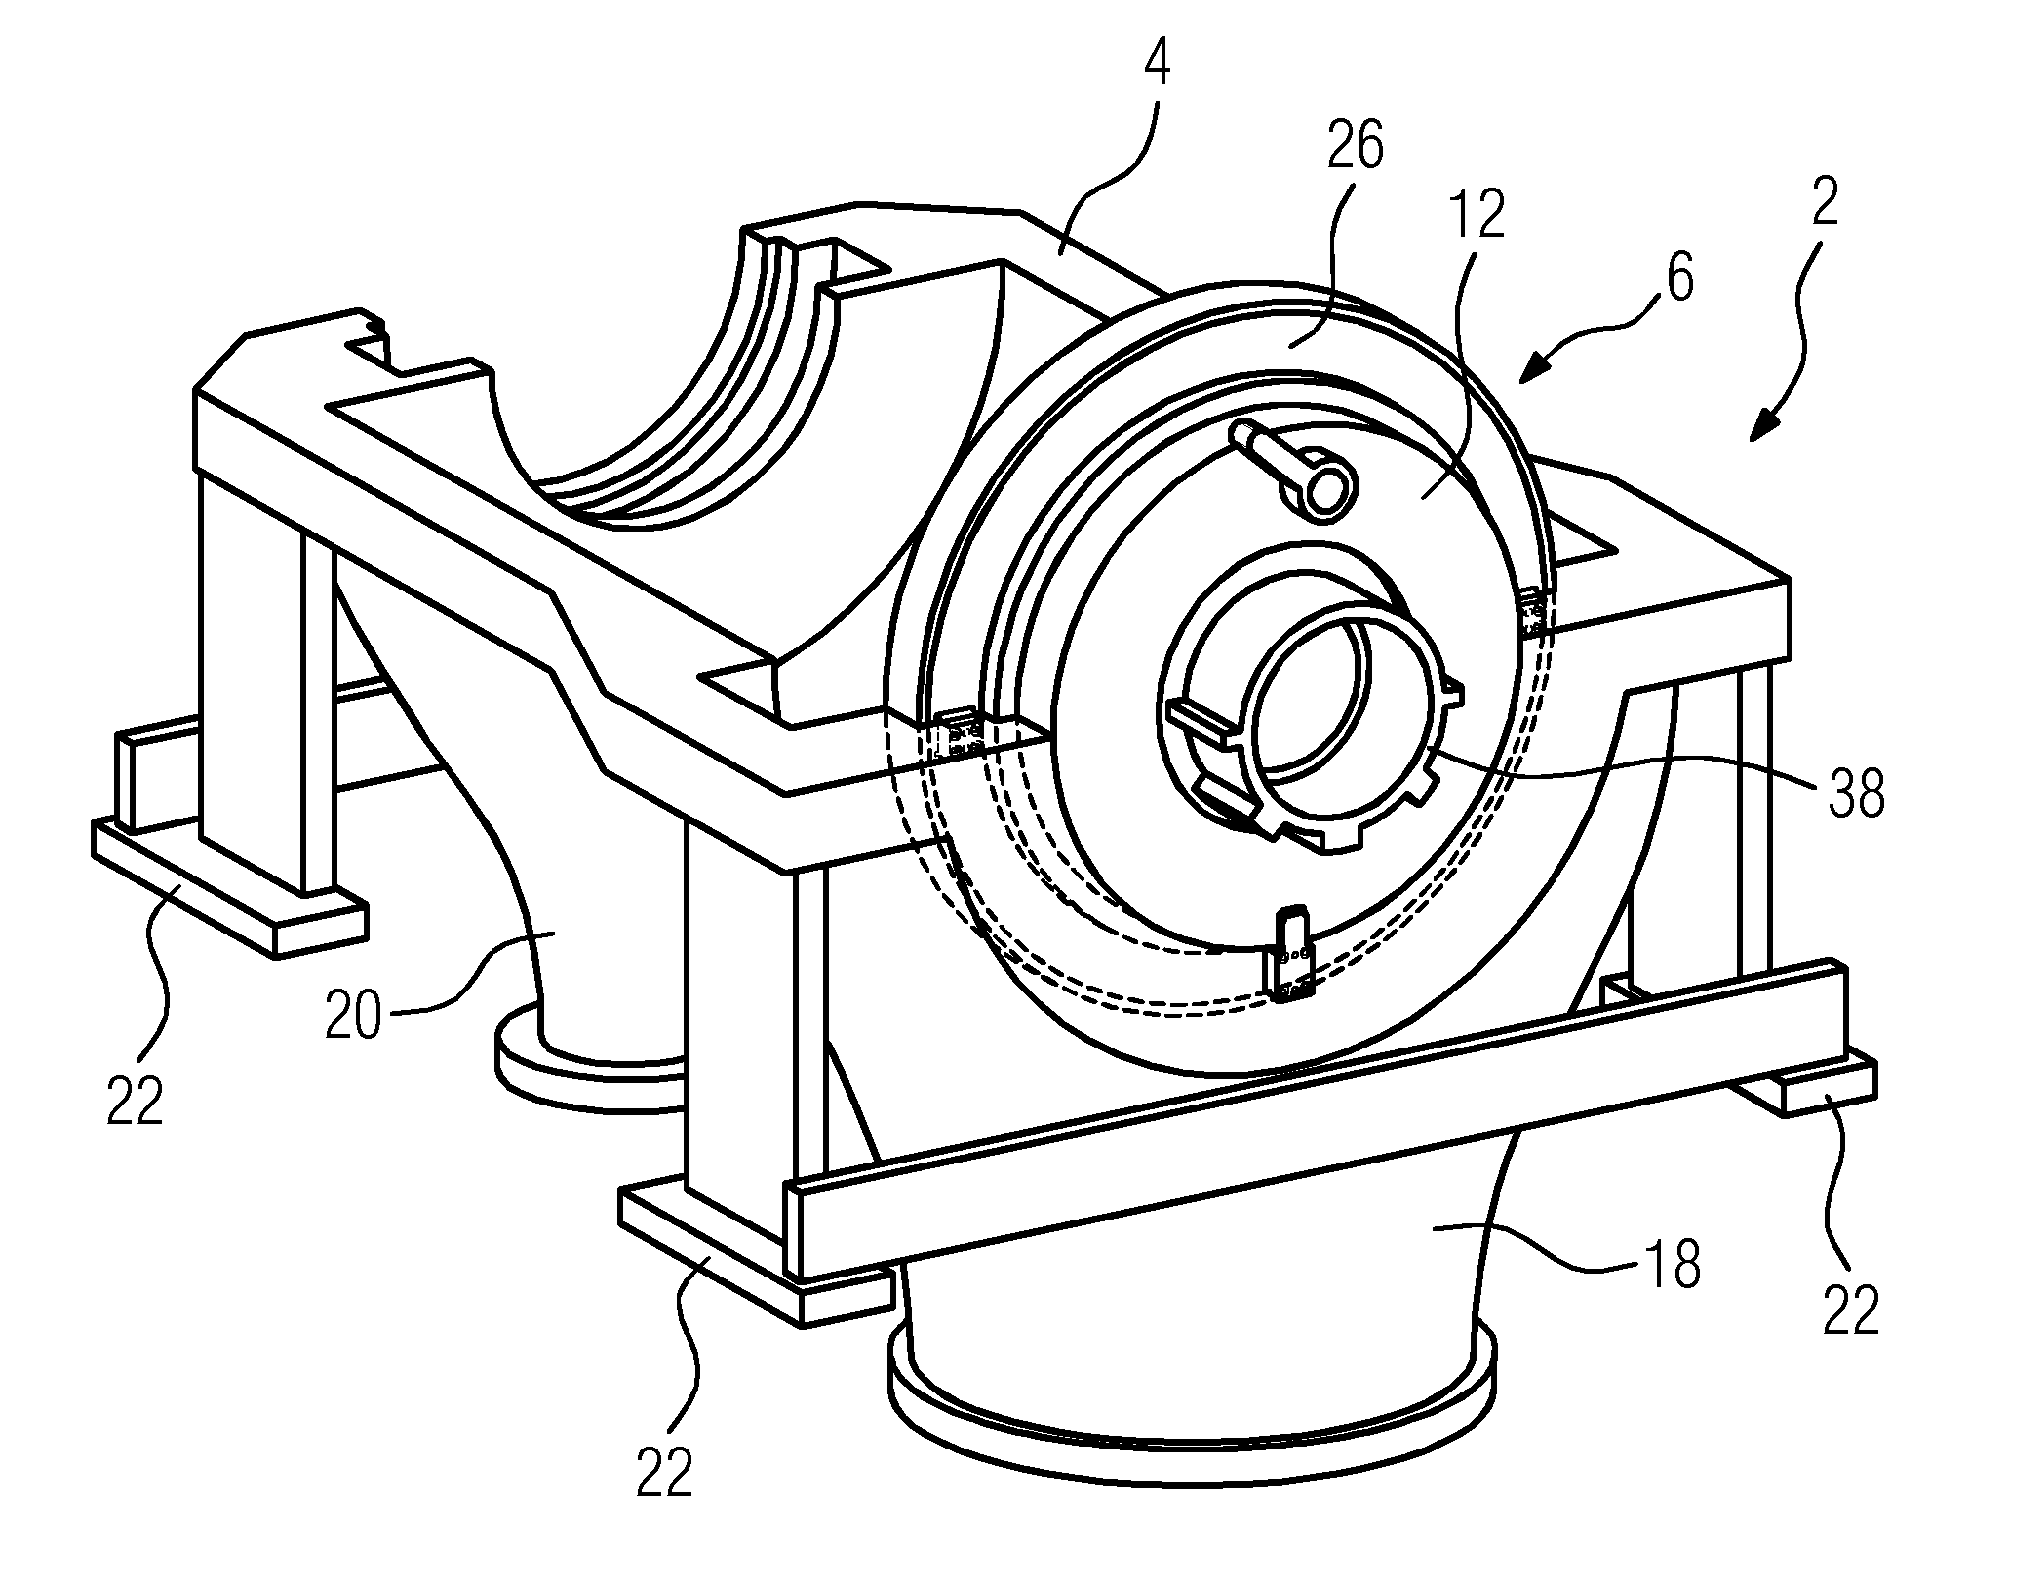 Turbomachine having a temperature-controlled cover